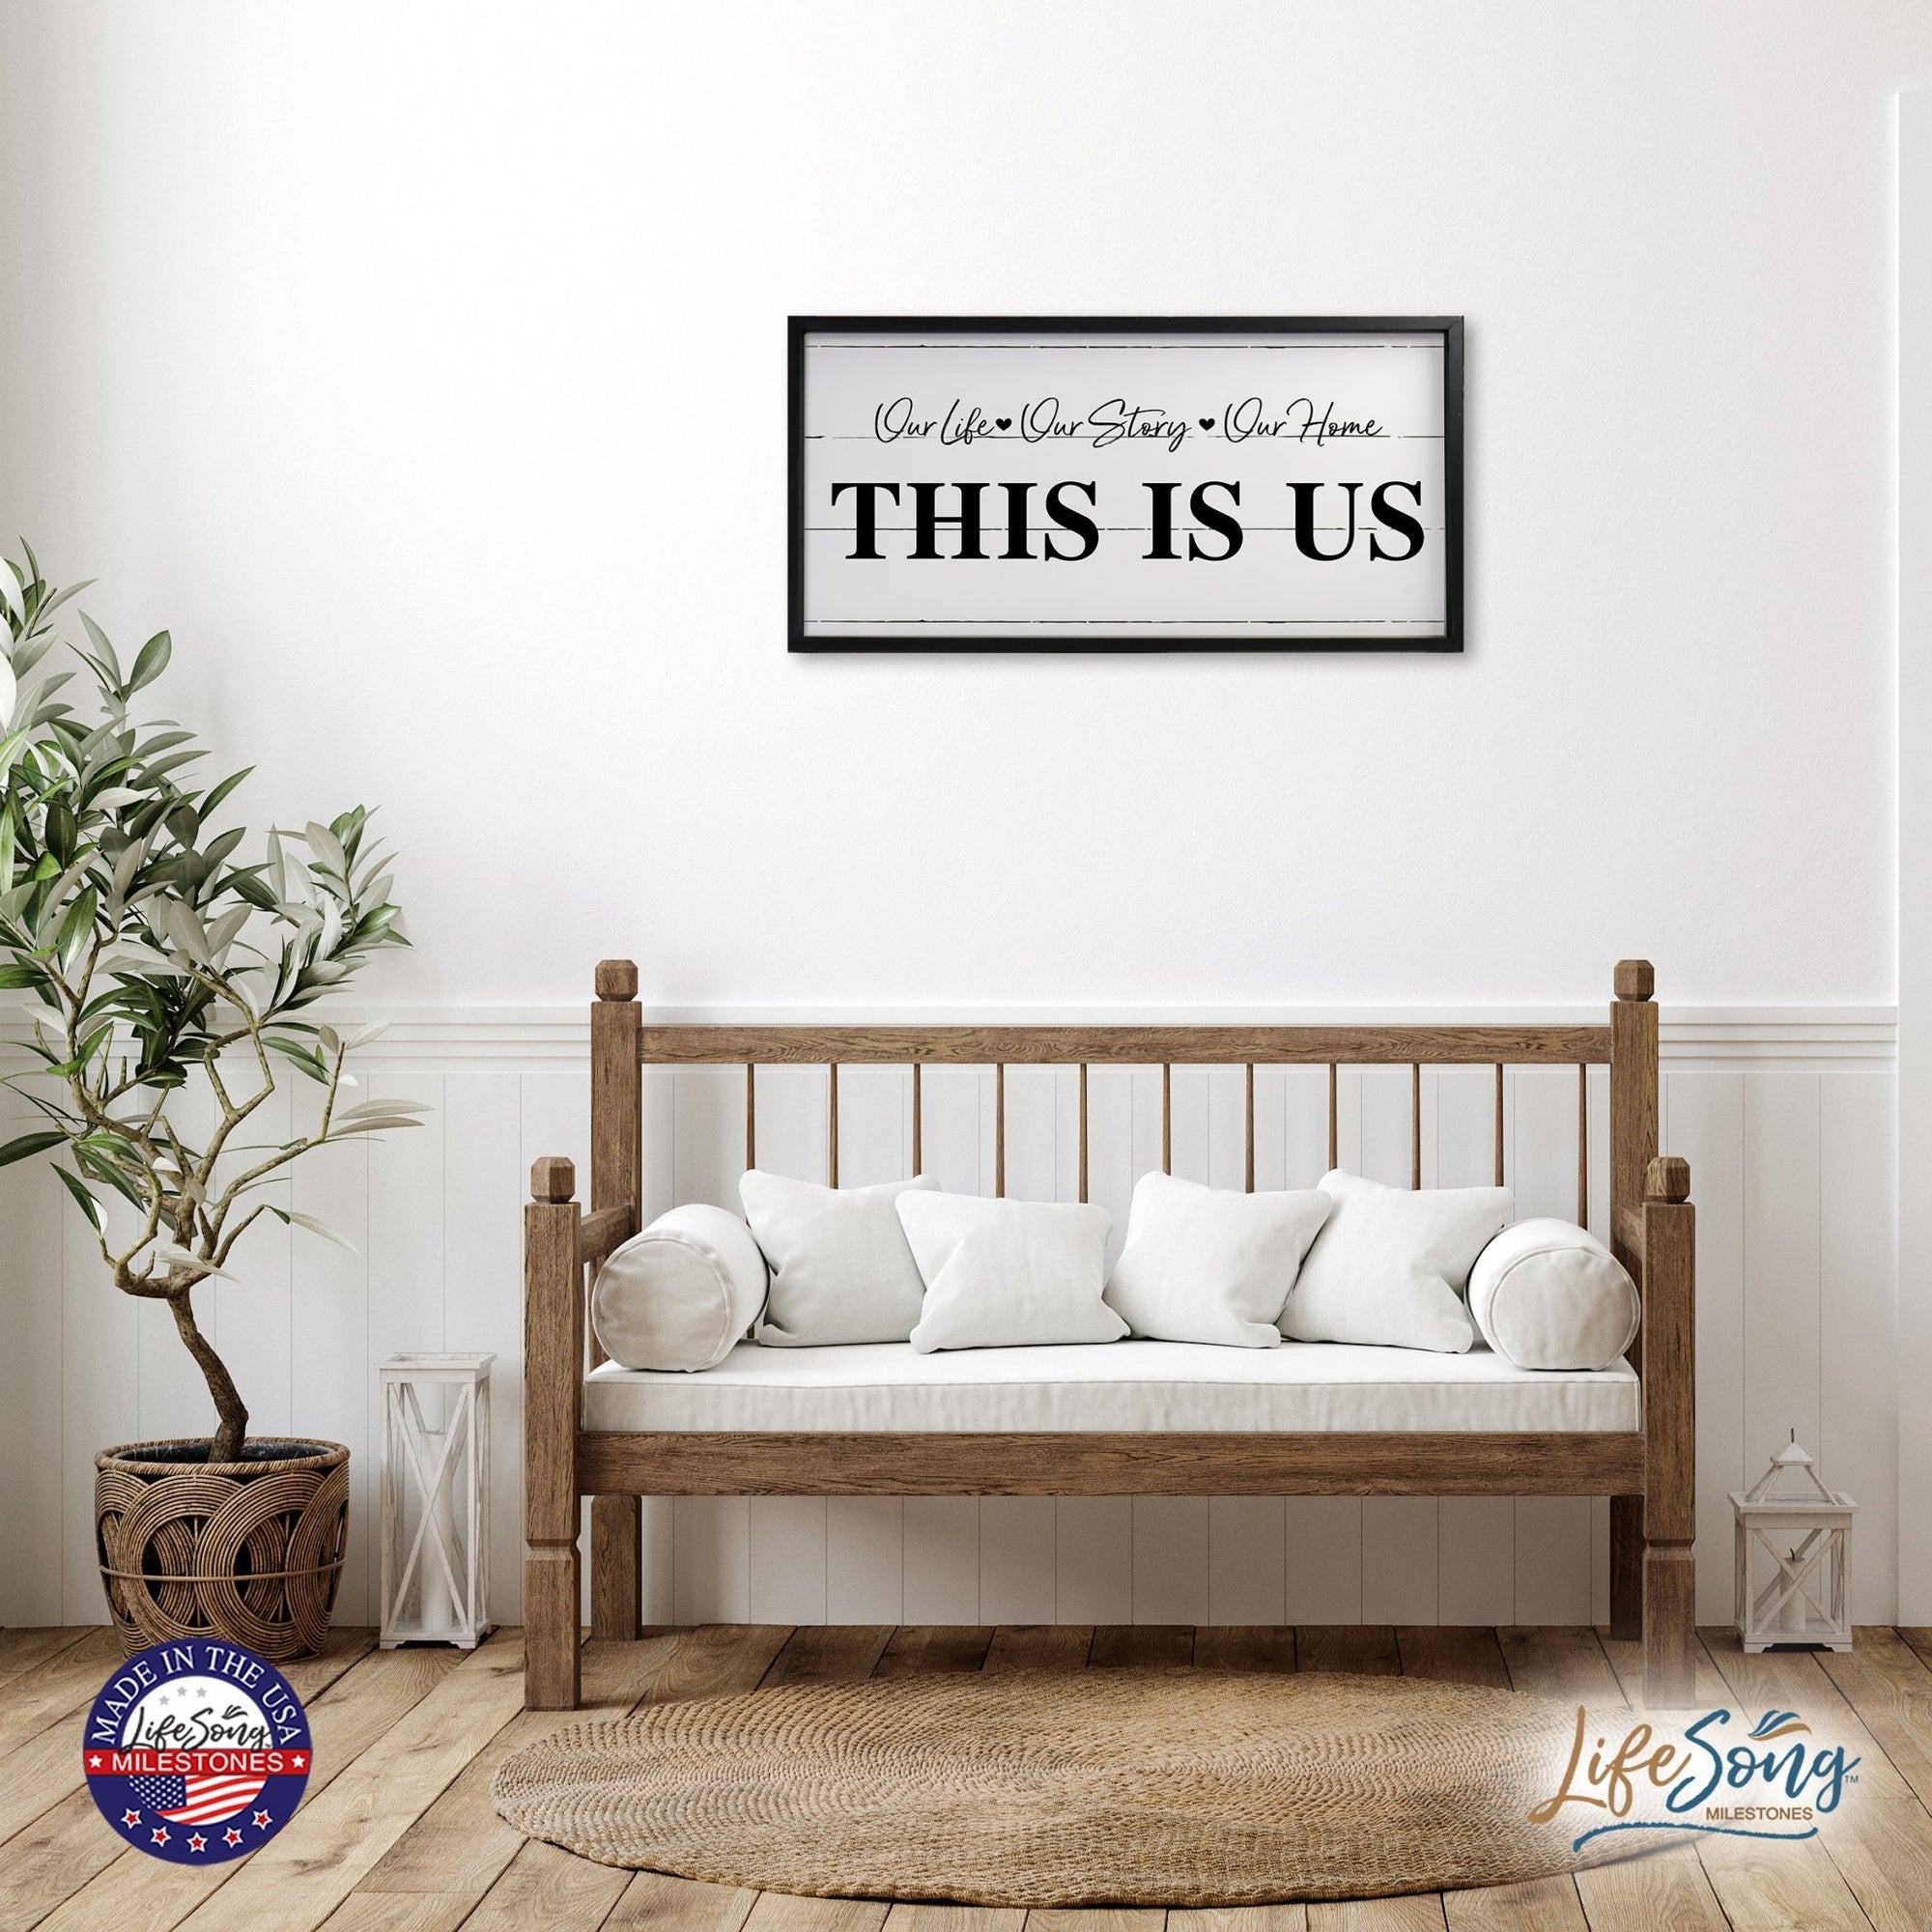 Large Family Wall Décor Quote Sign For Home Decoration 18 x 36 - This Is Us (Script) - LifeSong Milestones